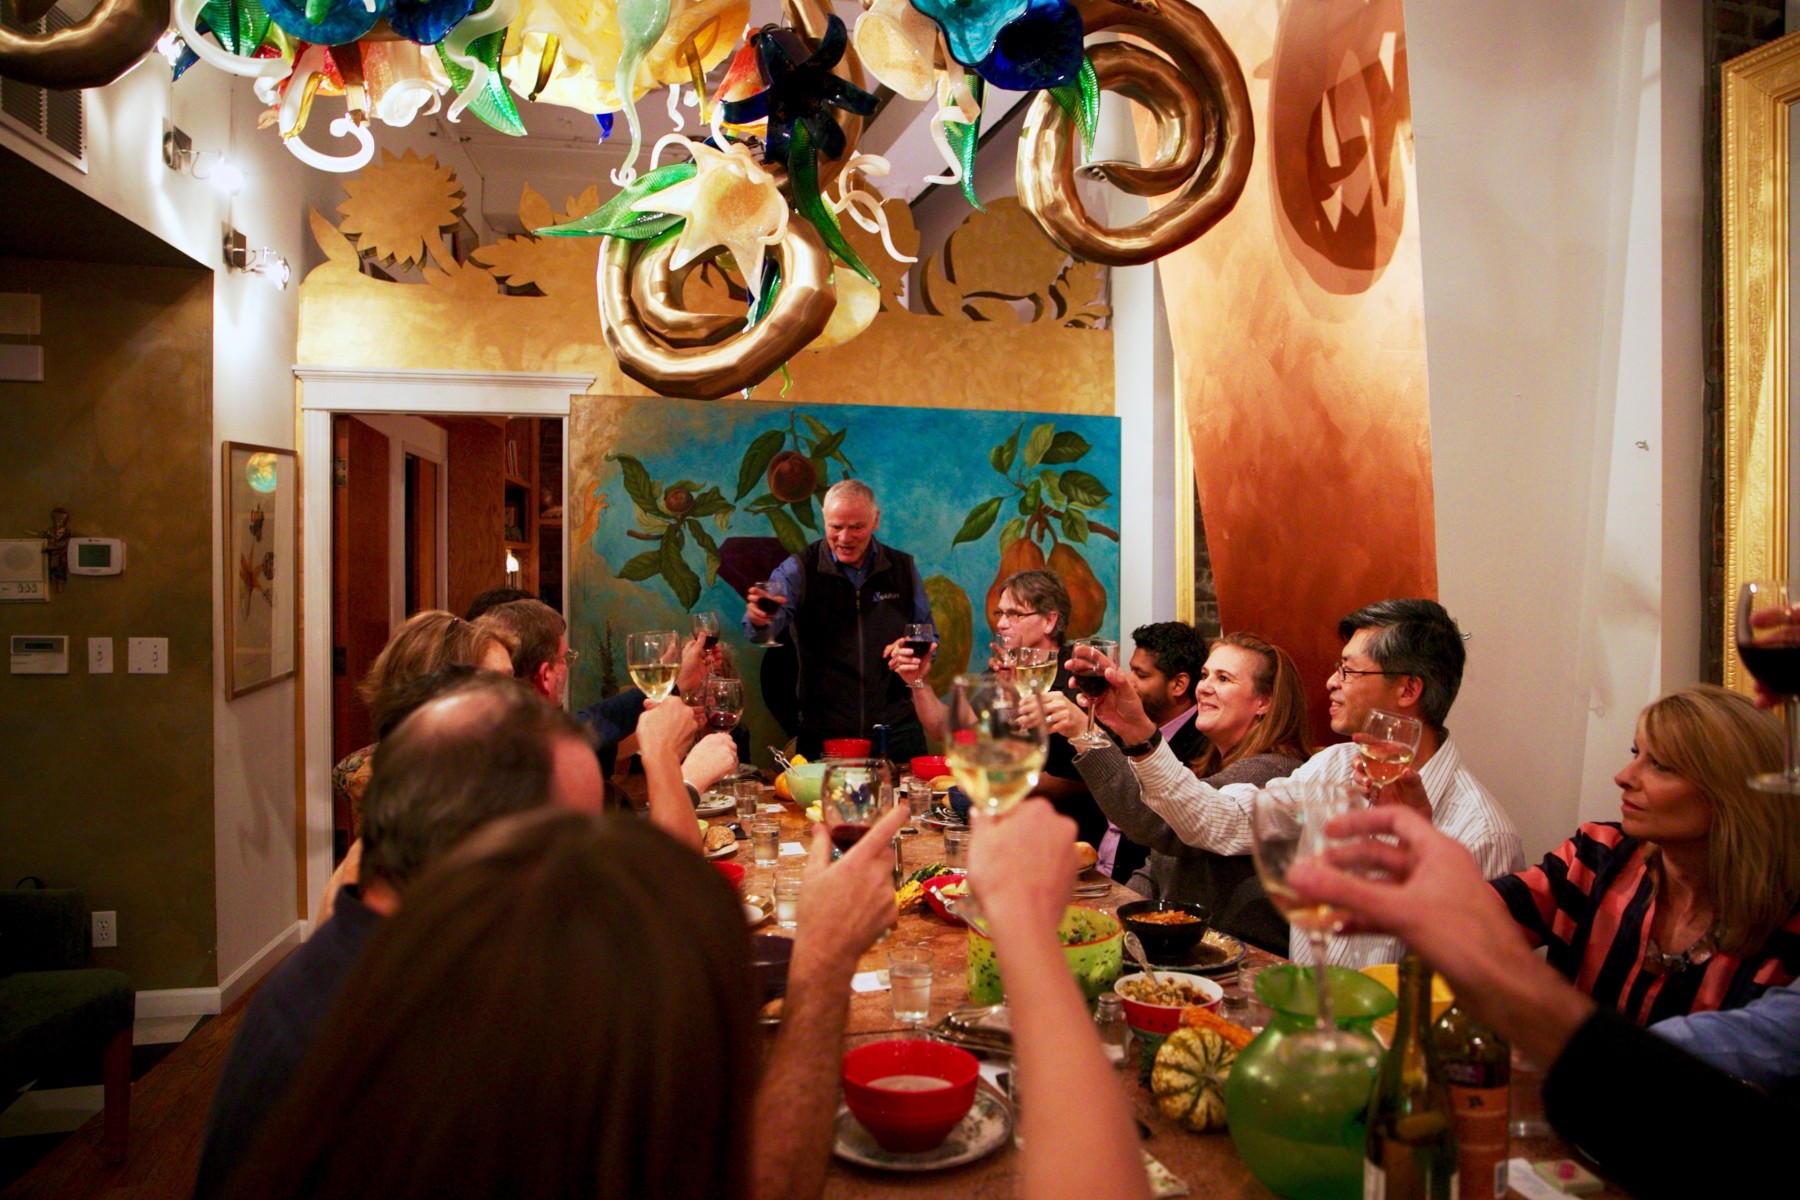 ISB President Dr. Lee Hood raises a toast to ISB's Consilience Program during an event at artist Ginny Ruffner's home.